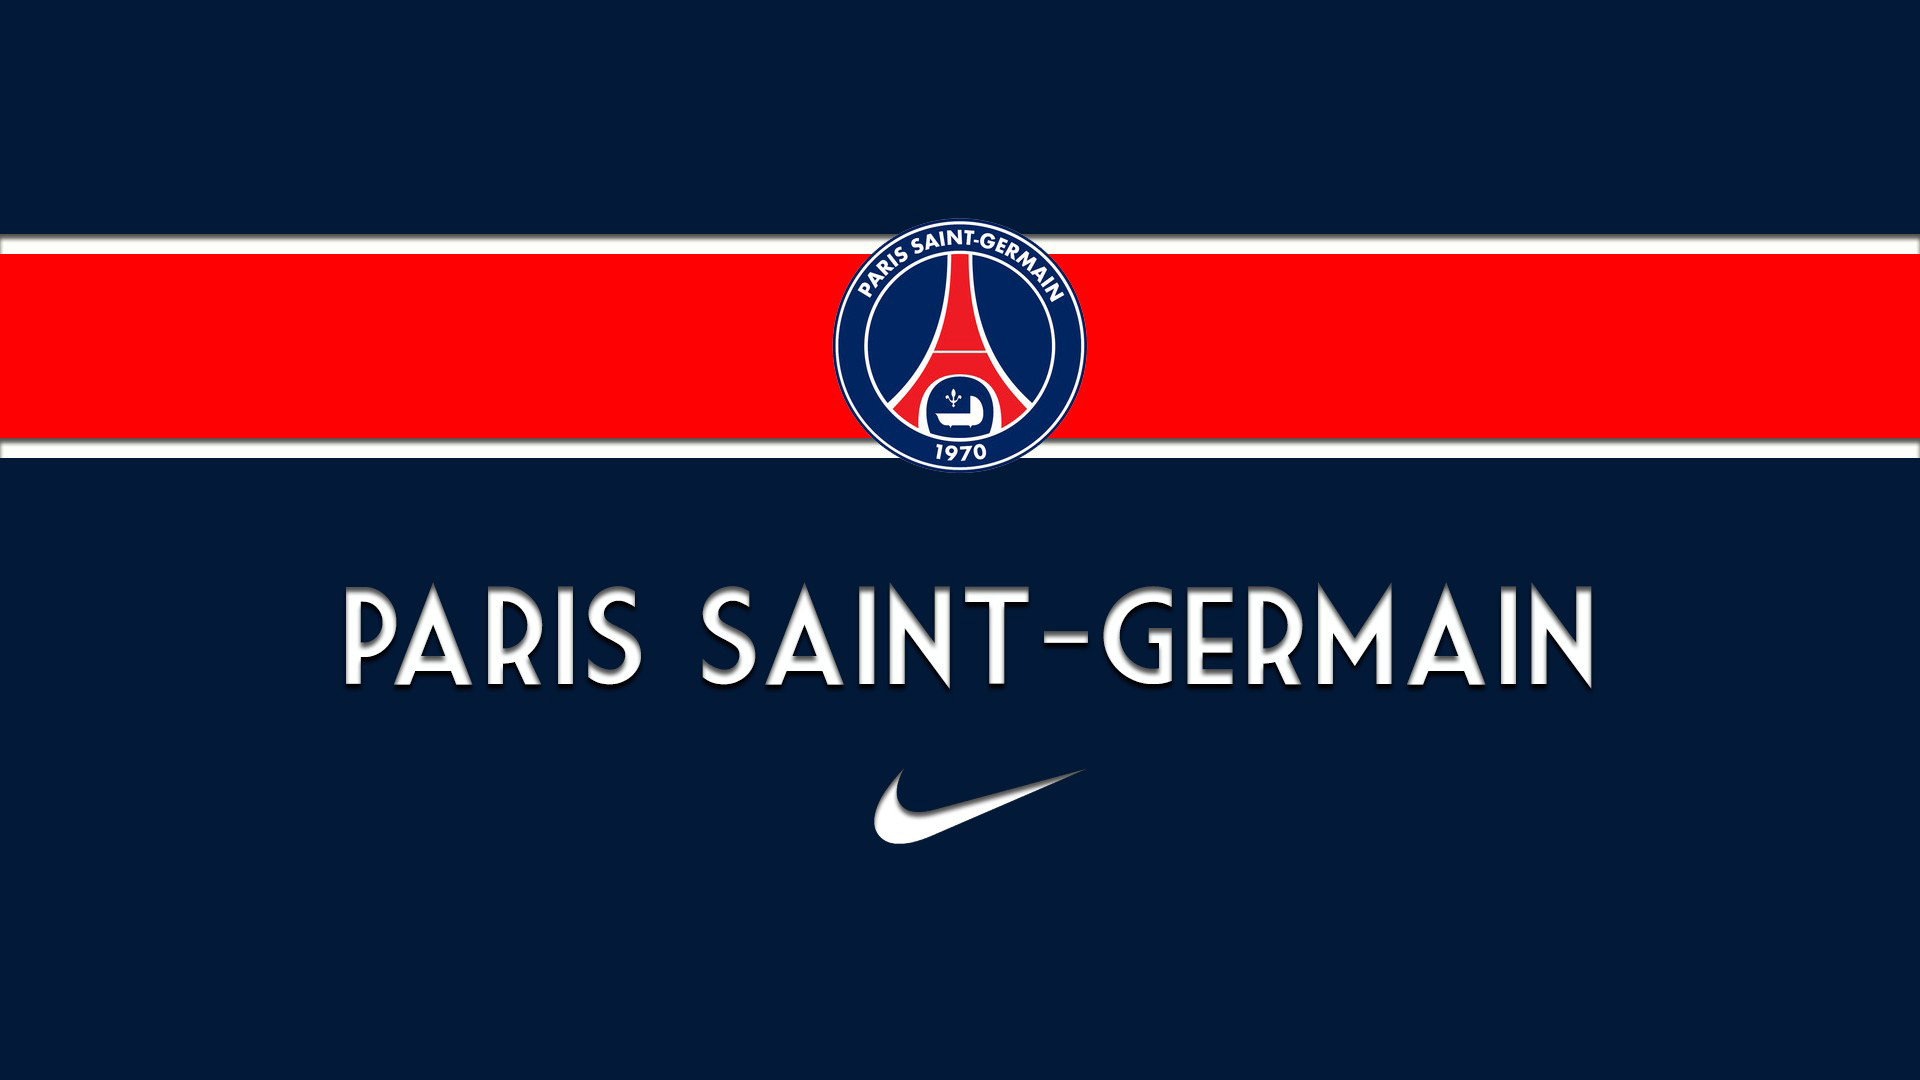 Paris Saint-Germain: Gained a global following as a result of their superstar signings and their dominance of French soccer. 1920x1080 Full HD Background.